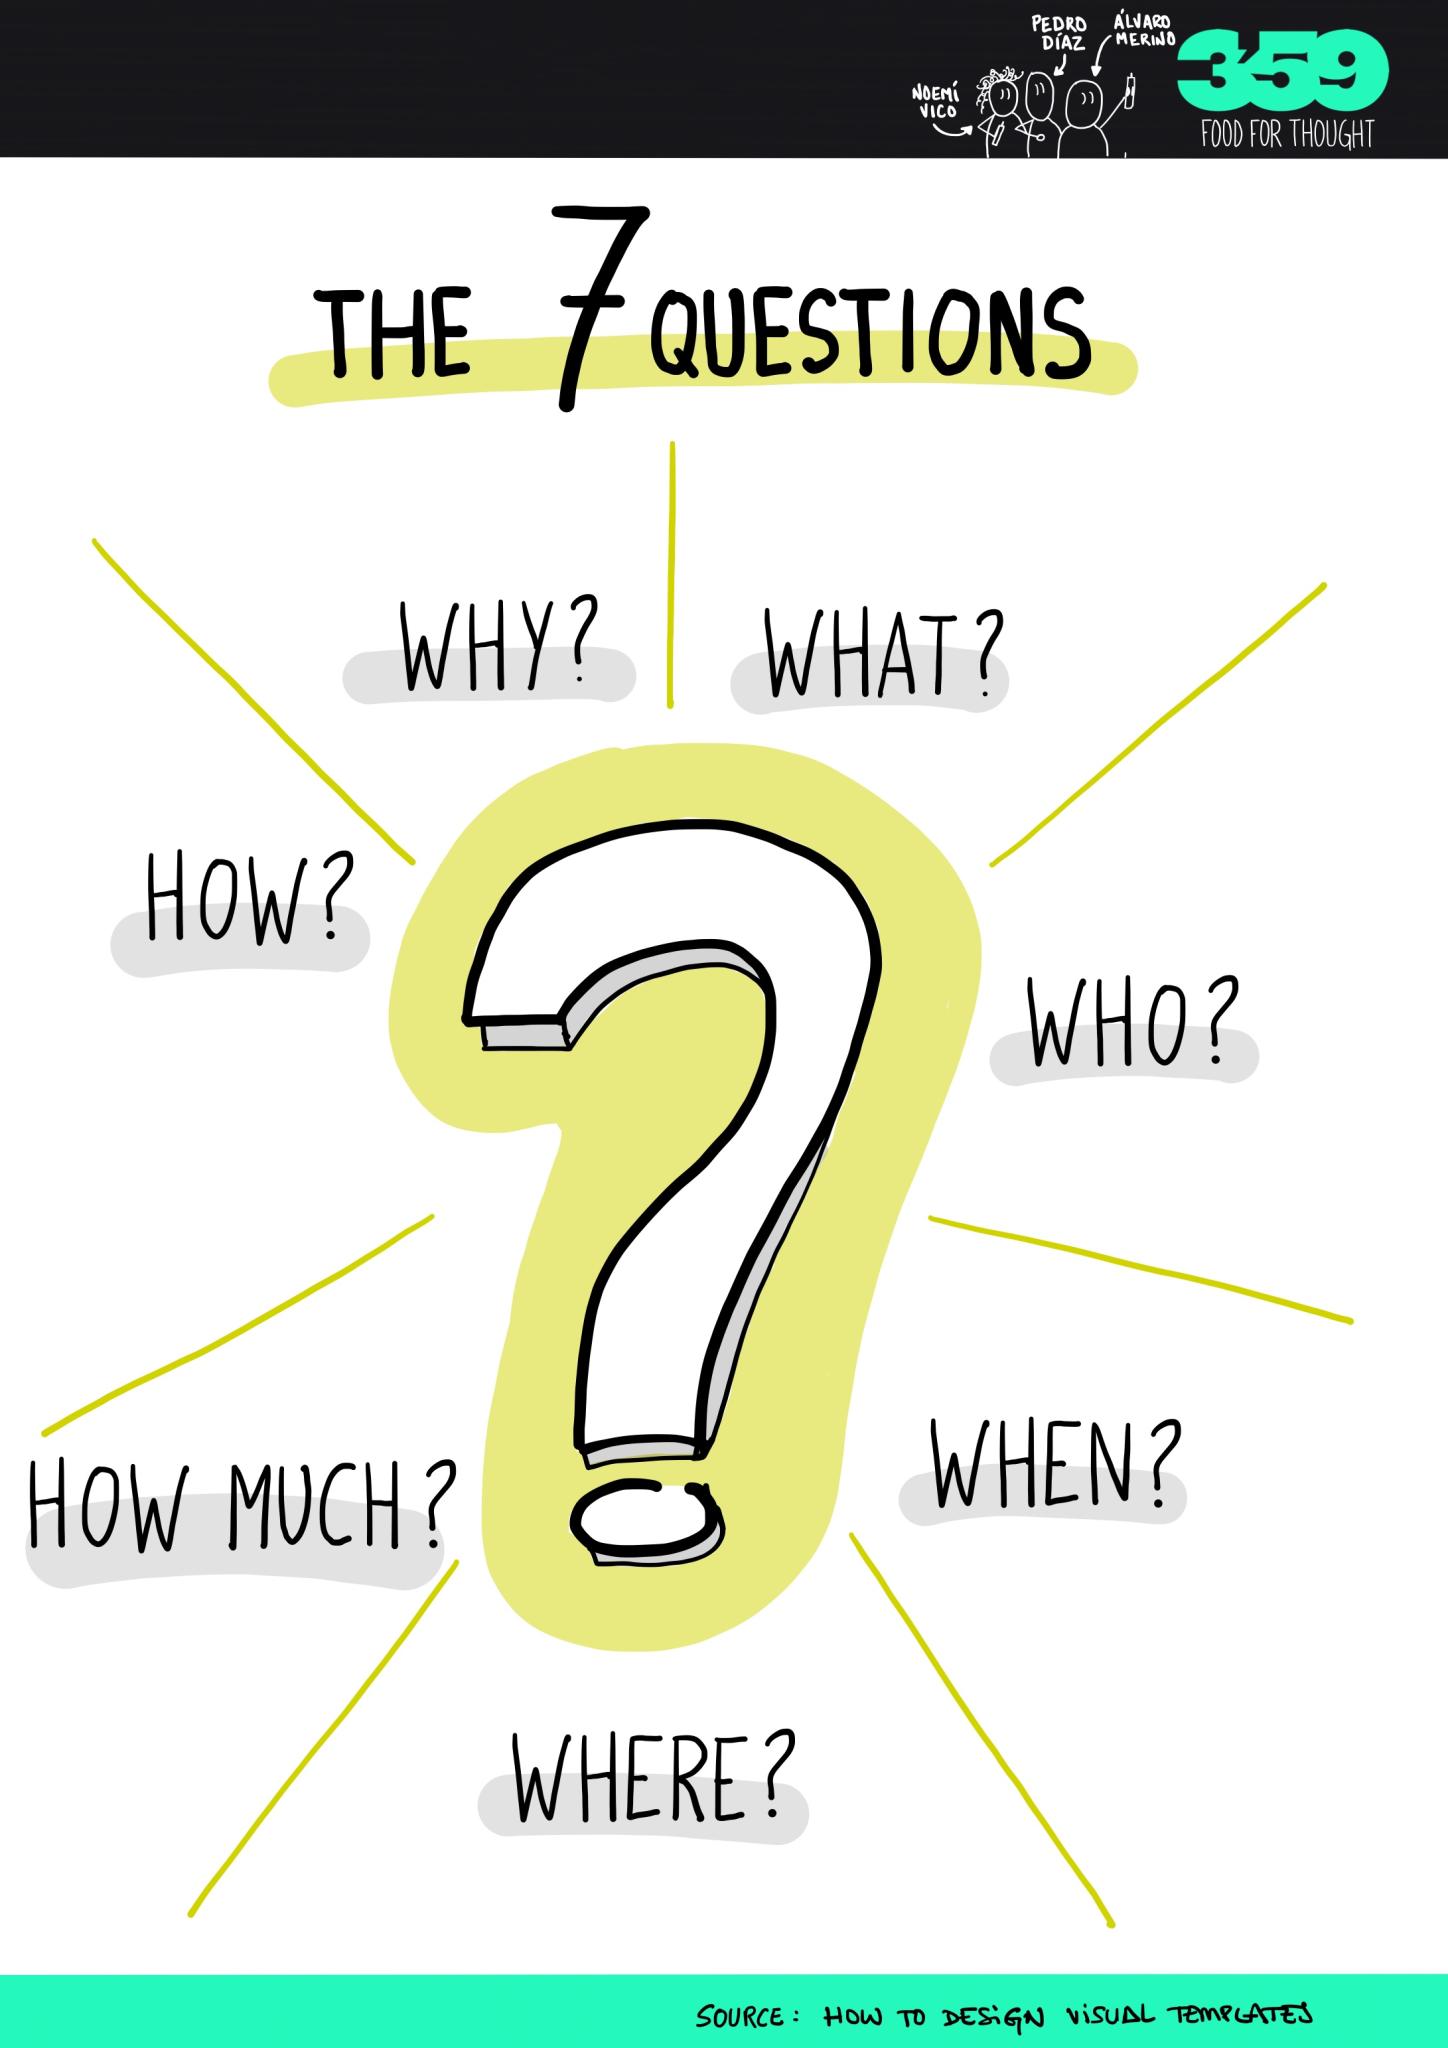 7 simple questions that can lead to 7 powerful reflections